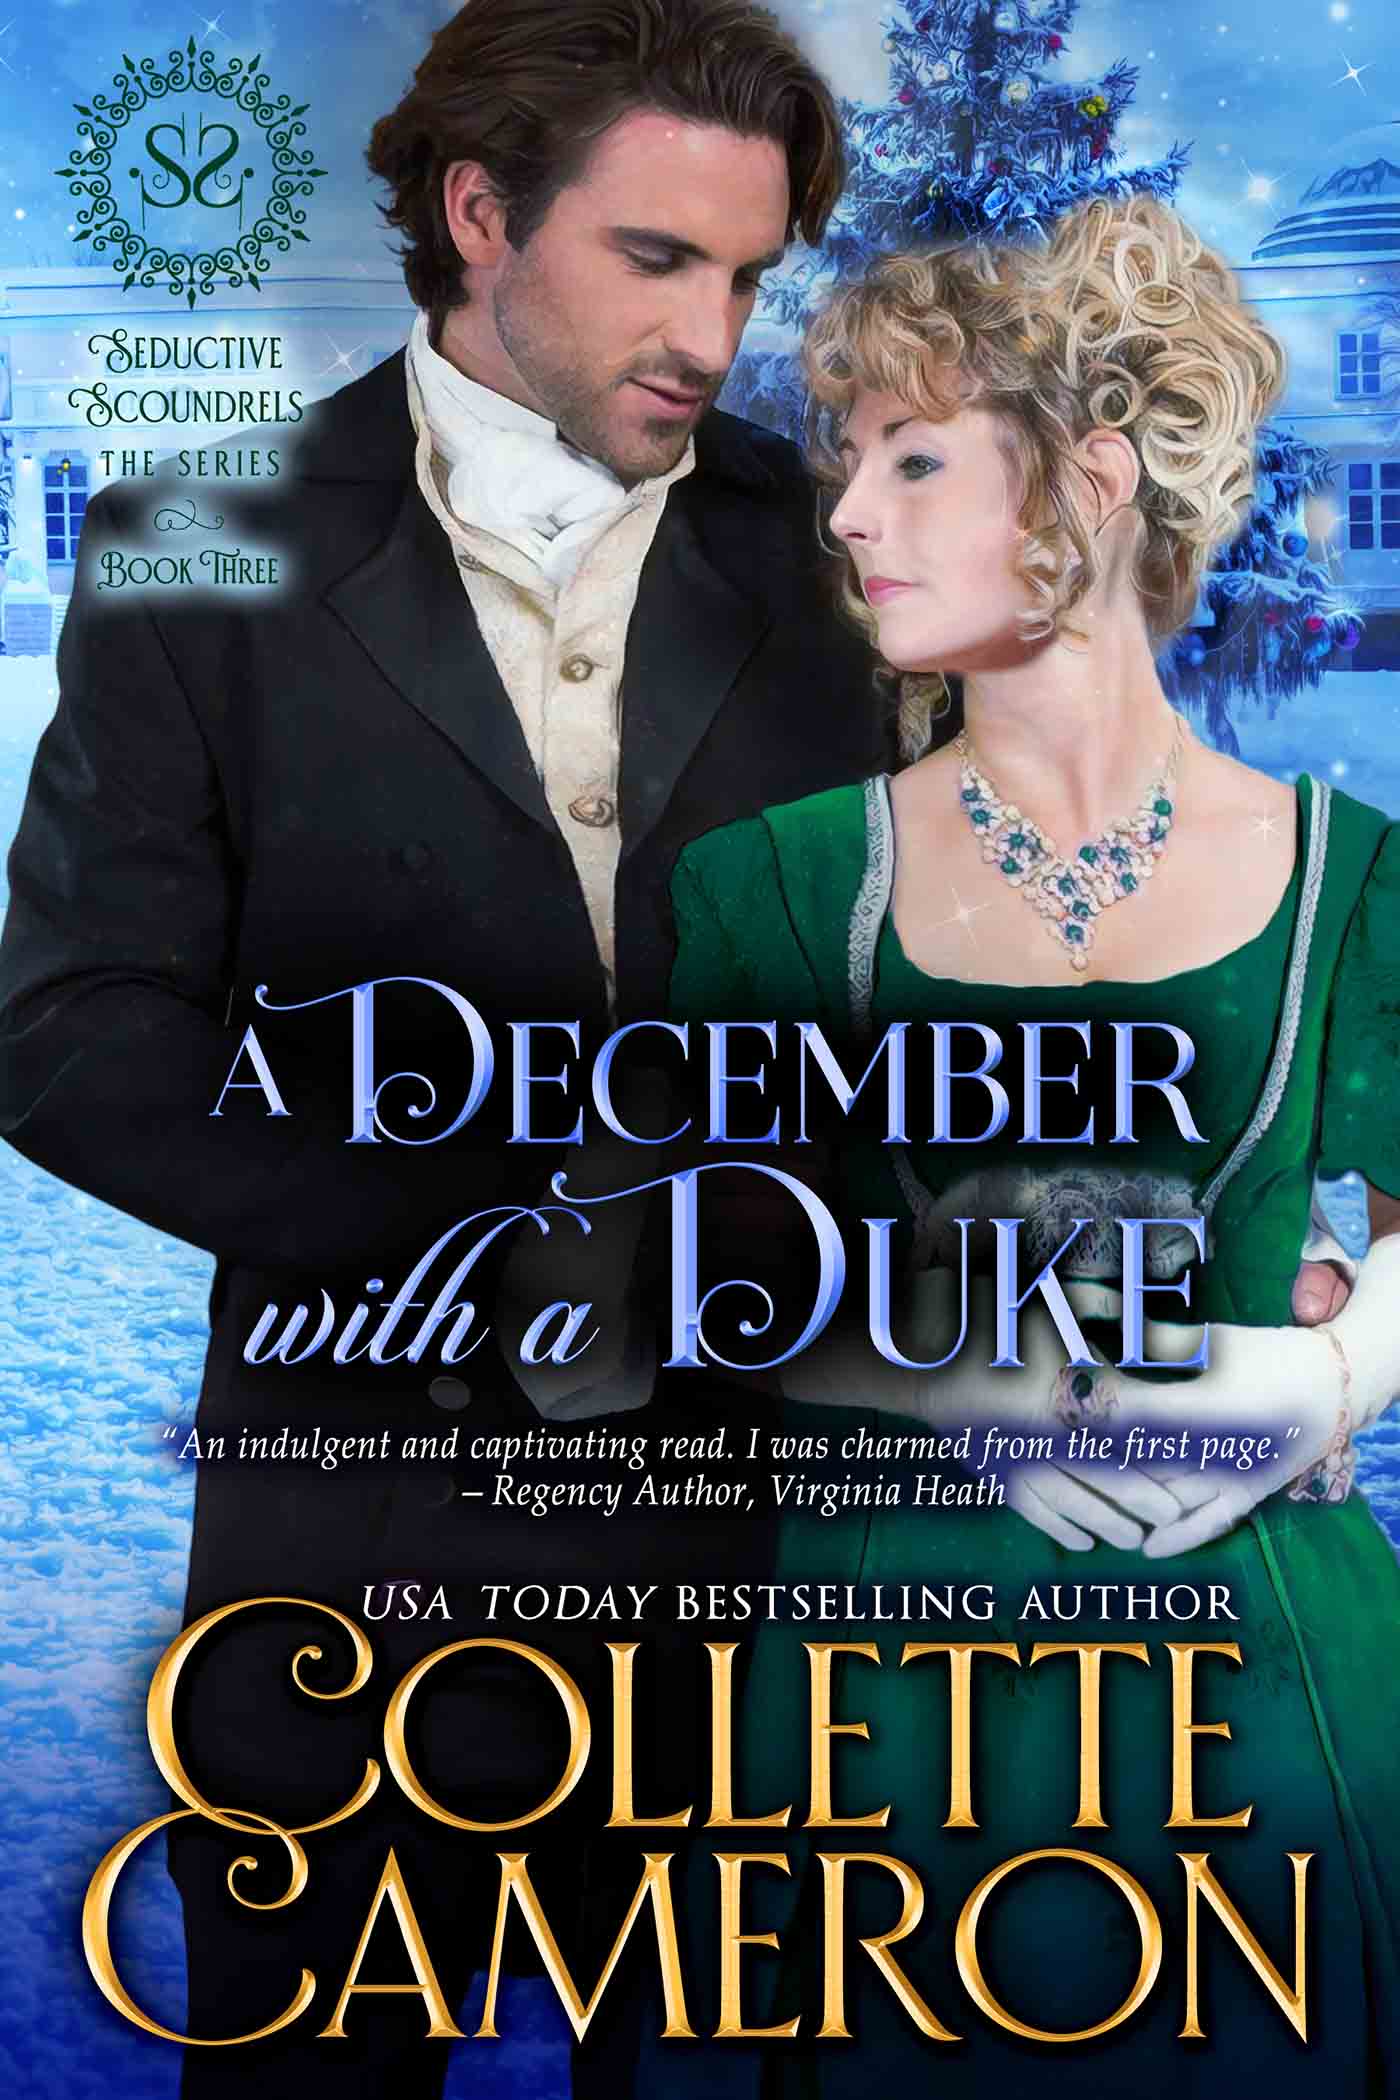 A December with a Duke is only 99¢!